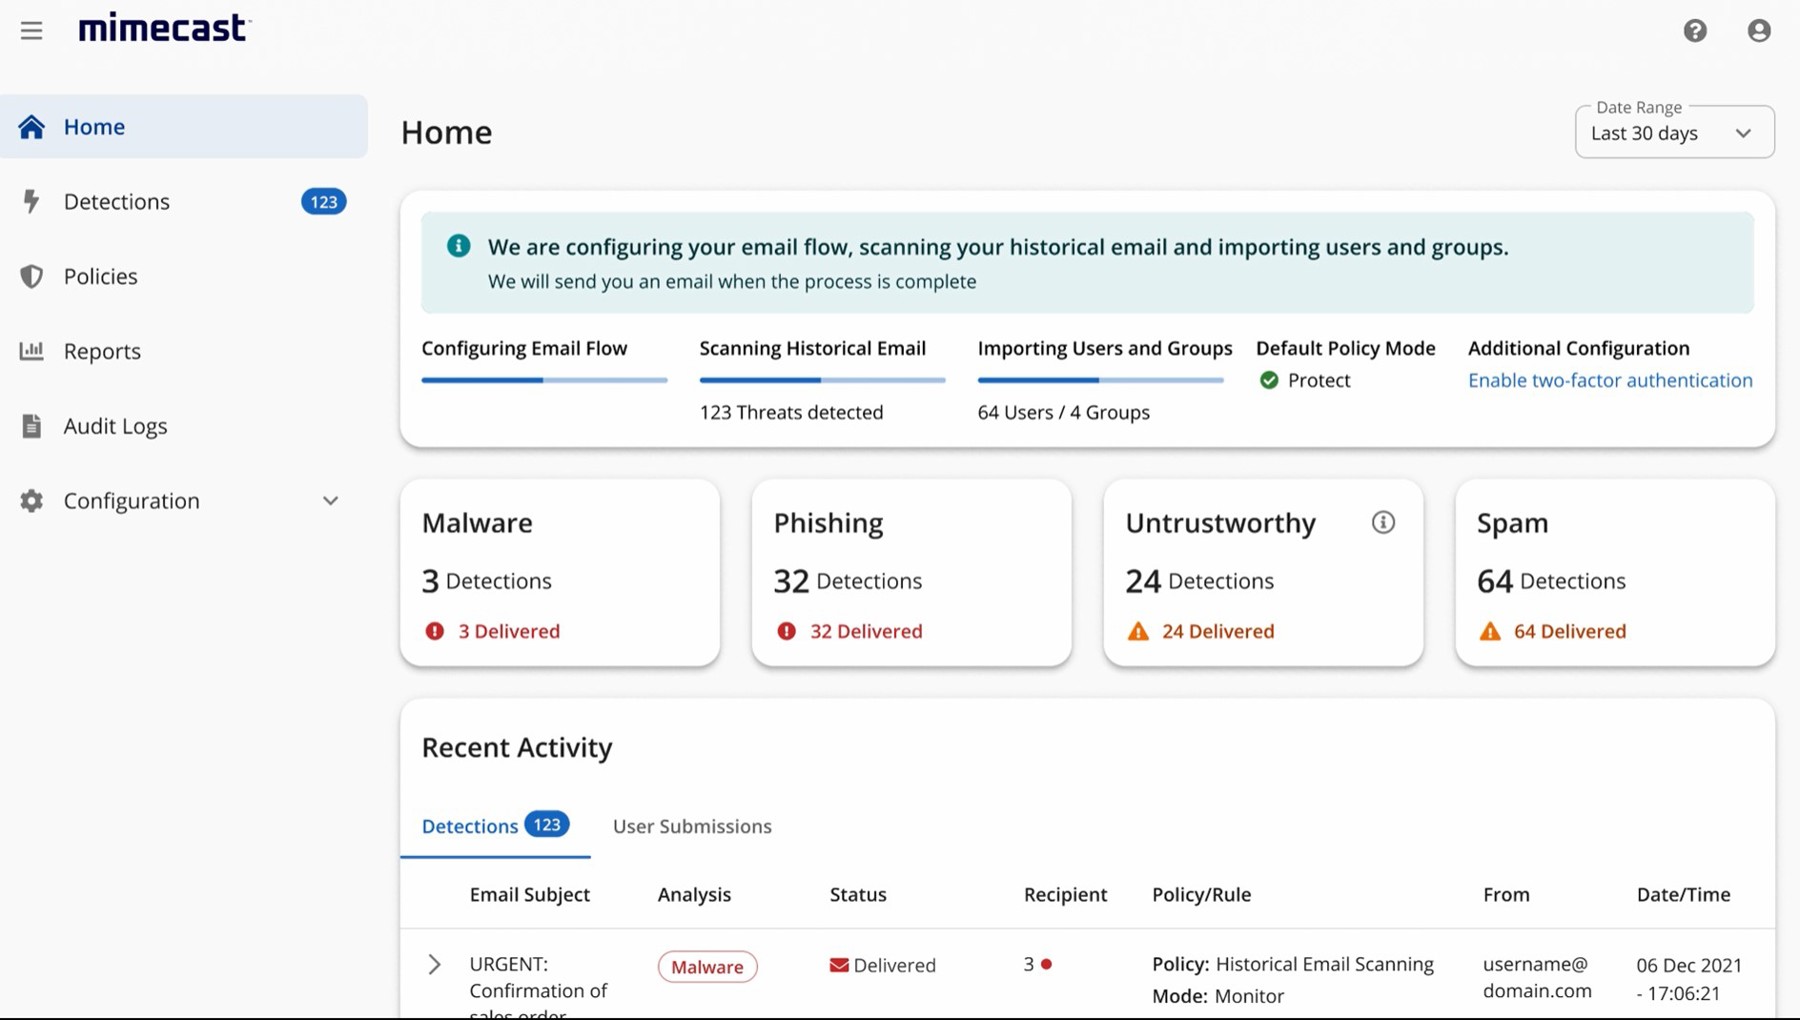 The Home tab of Mimecast's Cloud Integrated web app, which contains a list of in-progress tasks, notices about malware, phishing, untrustworthy and spam email detections, and a recent activity list of detections.